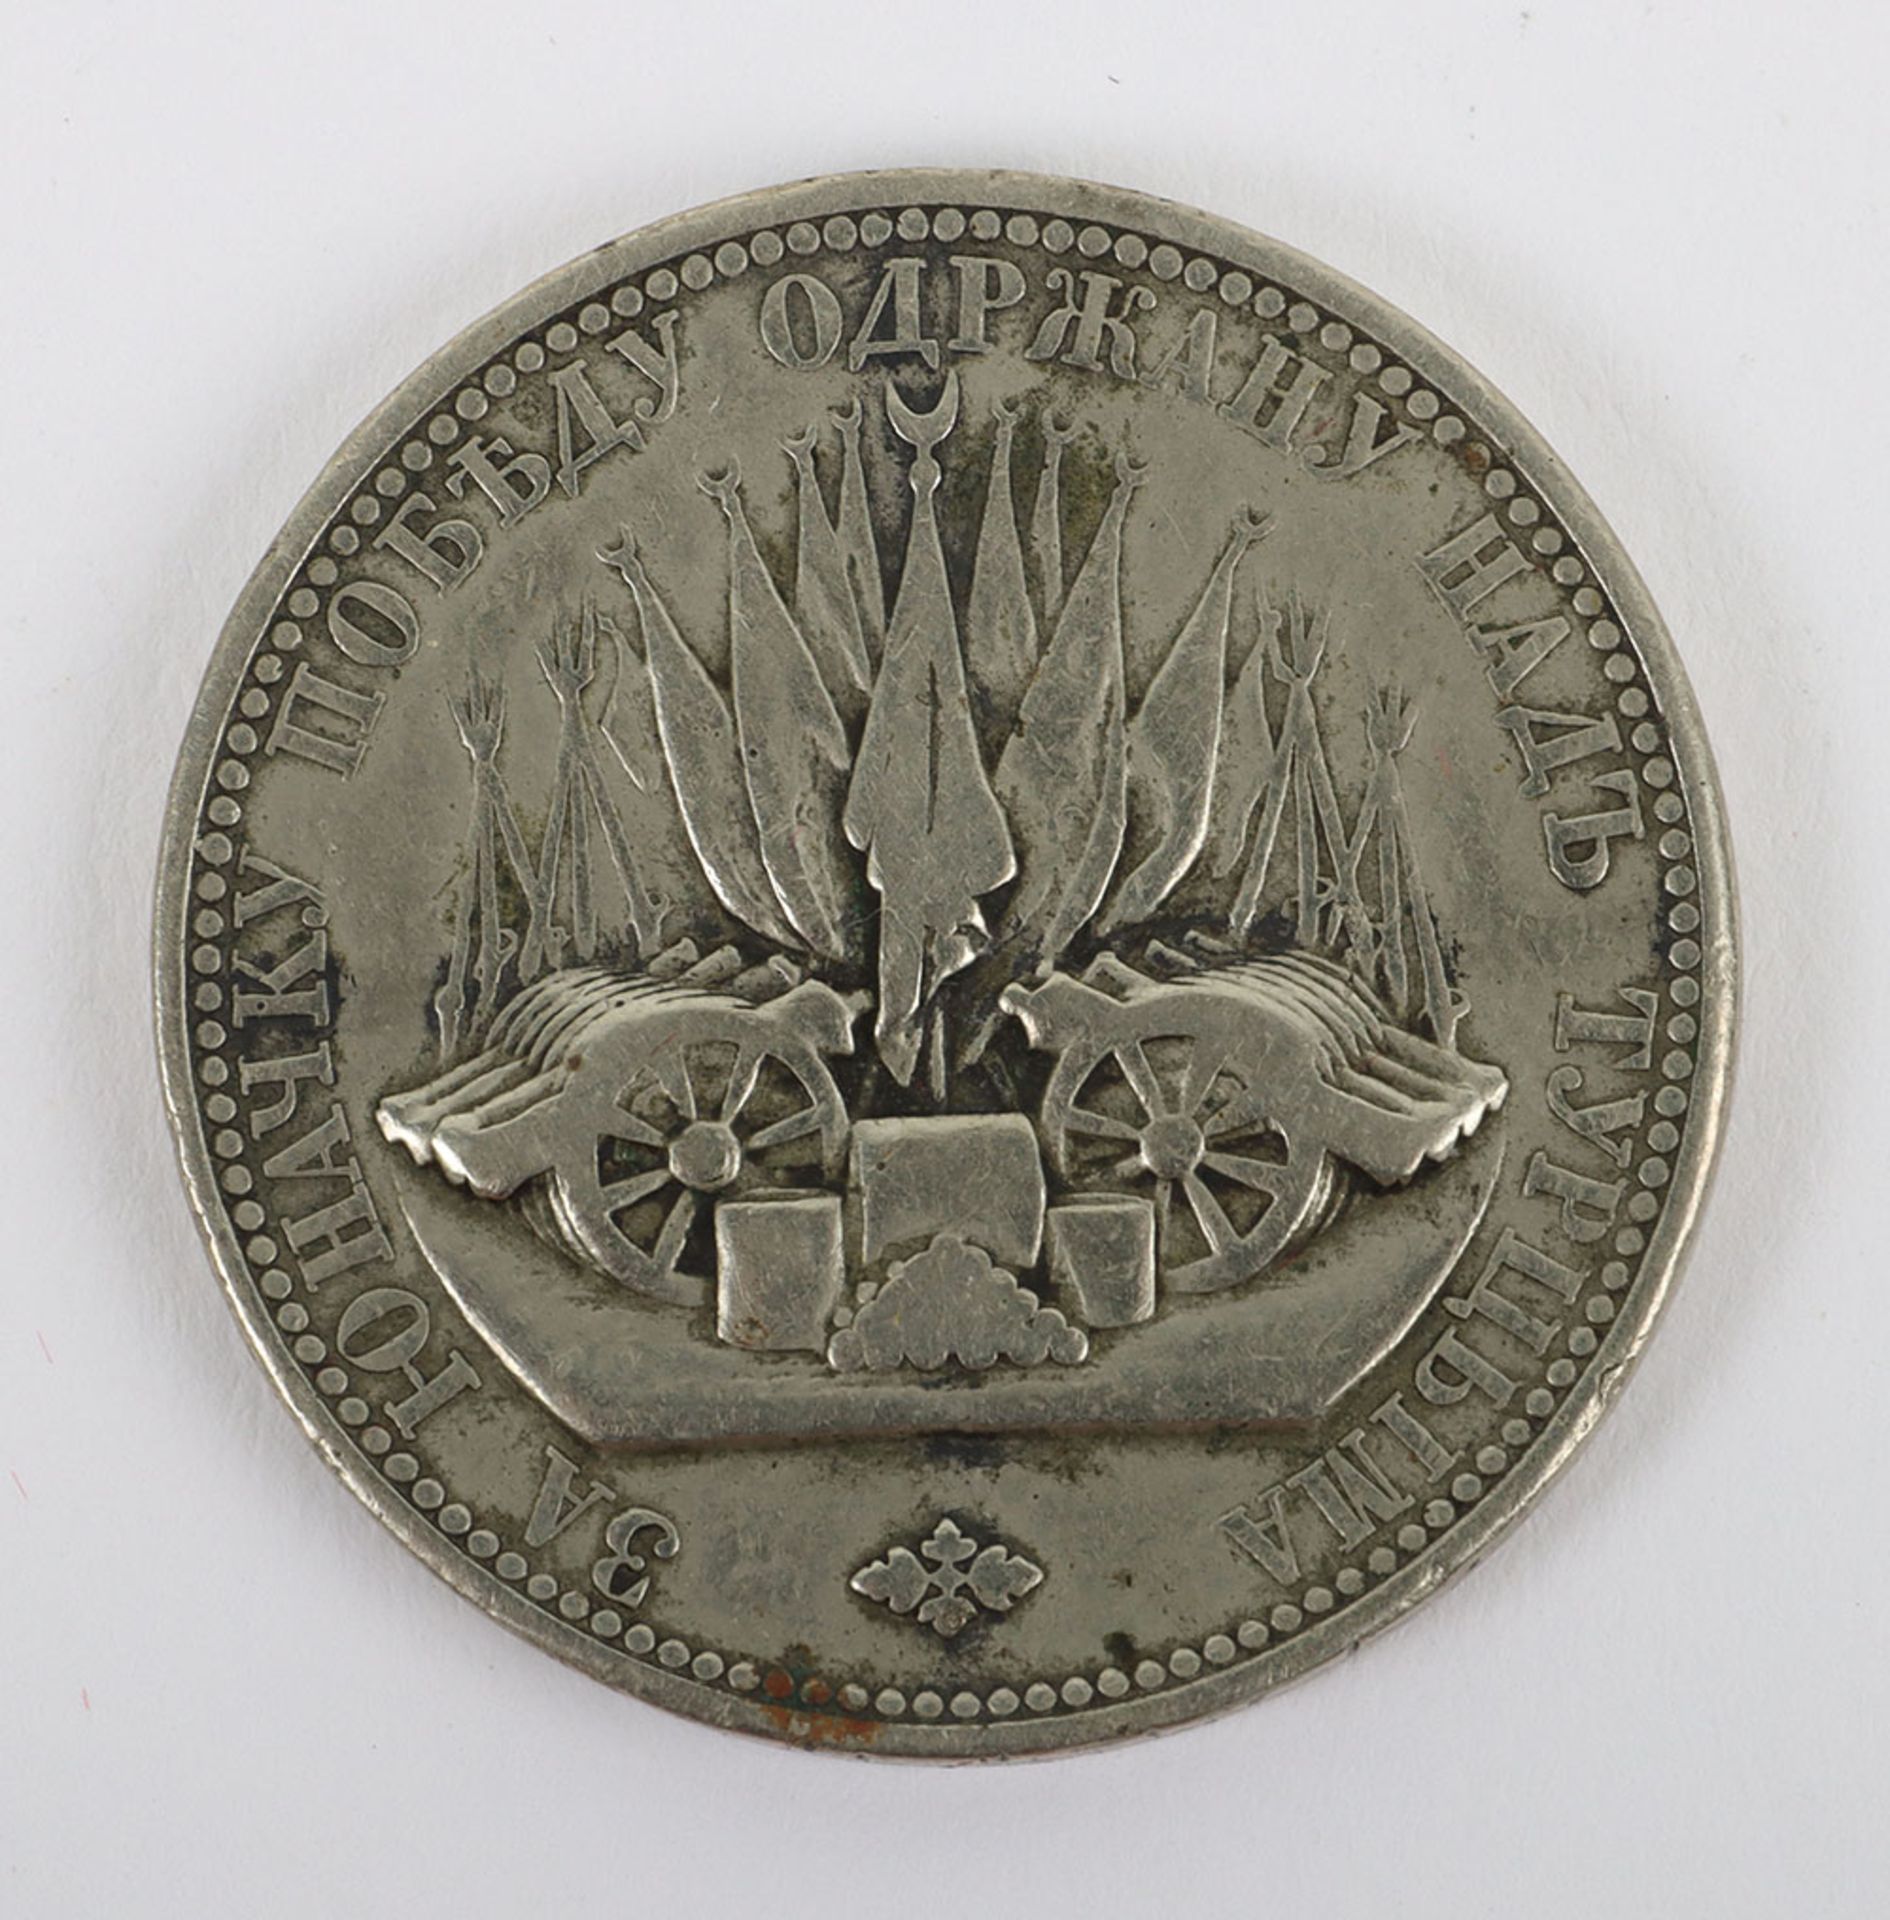 Battle of Grahovac , 1858 Campaign Medal